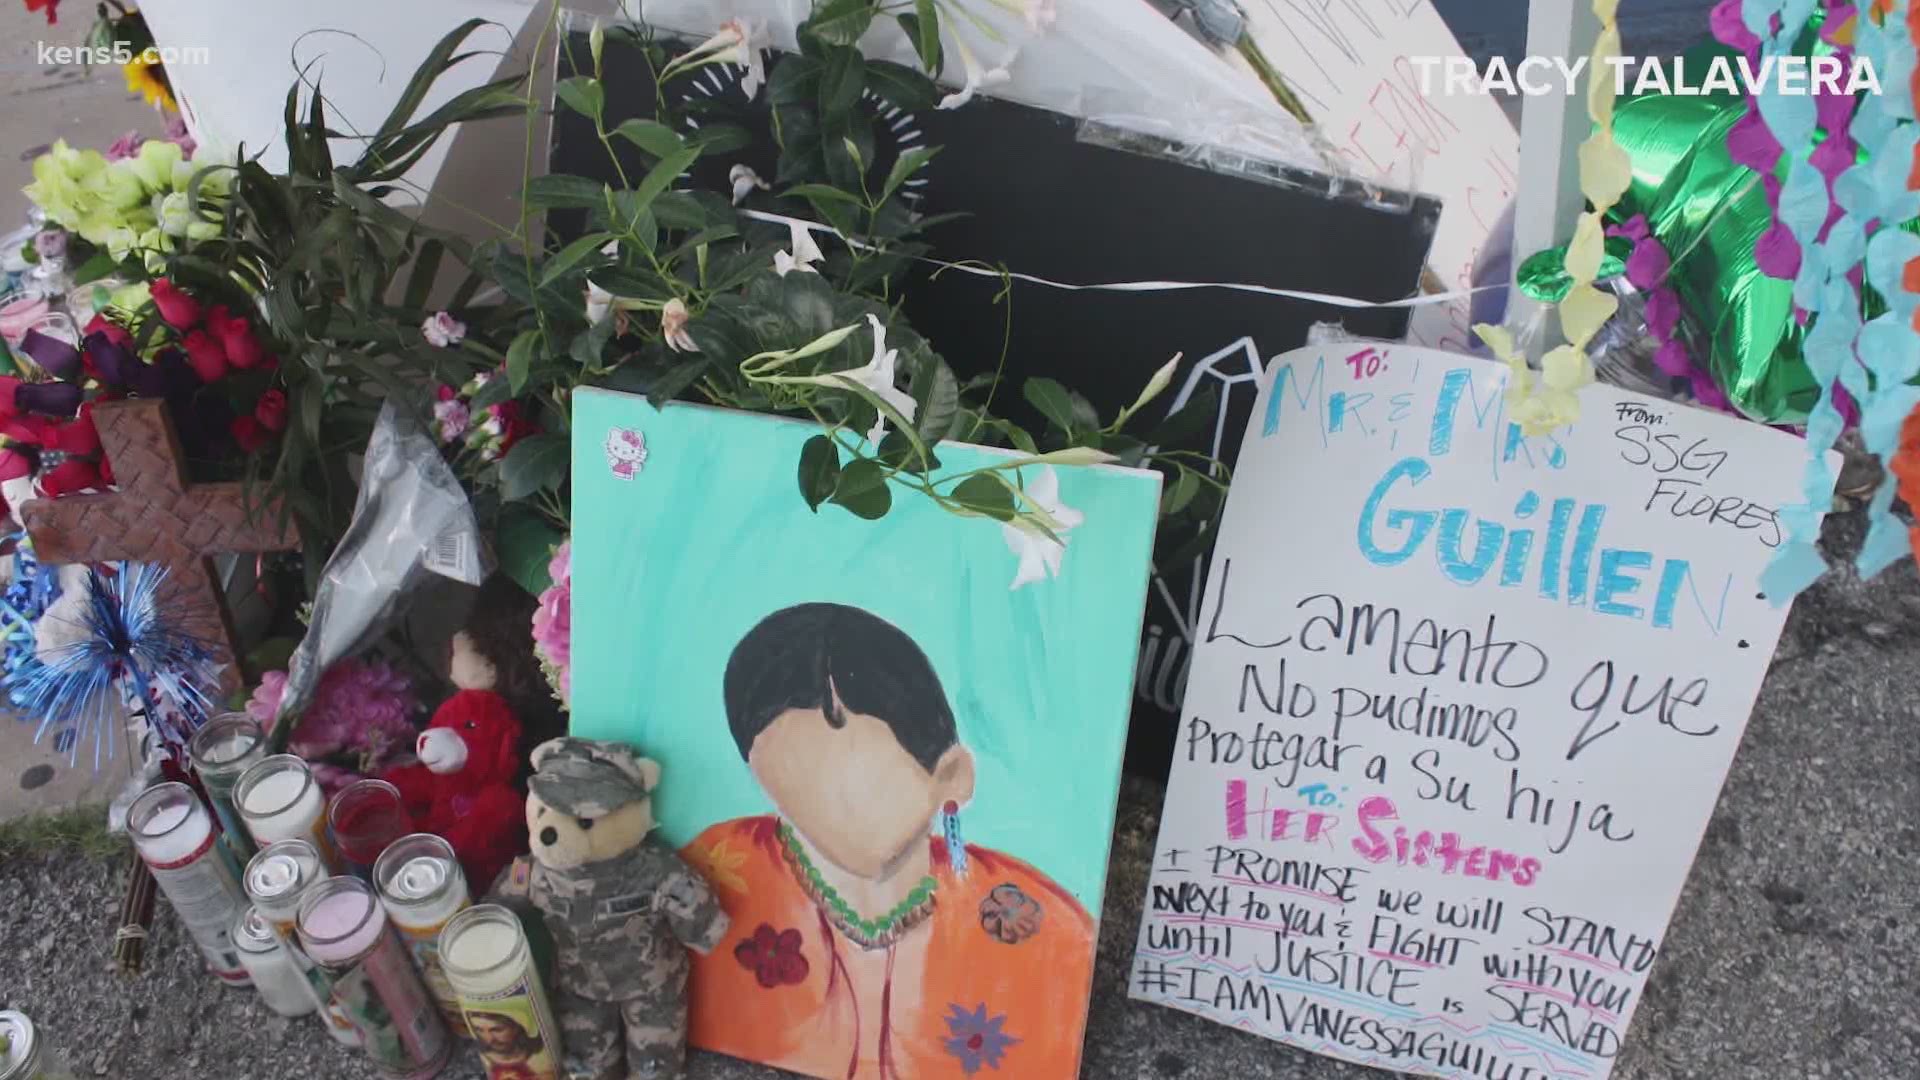 Outside Cafe Azteca, people drop off flowers, signs and drawings of the young soldier. They're demanding justice for Guillen and her family.